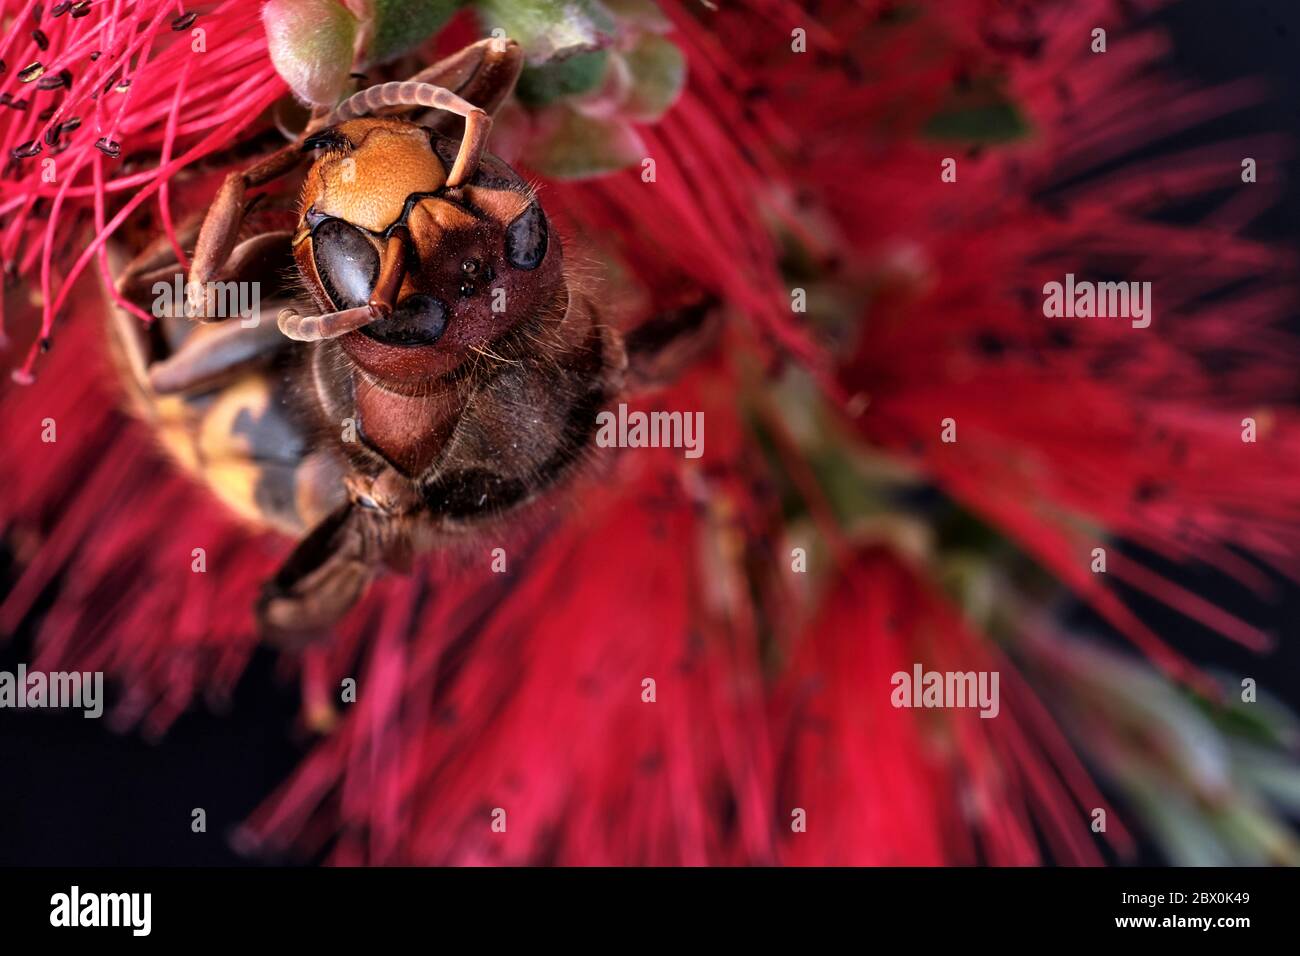 A dead Asian hornet on a common bottlebrush flower. This is an invasive species in Europe and has been nicknamed the Murder Wasp in the USA. Stock Photo